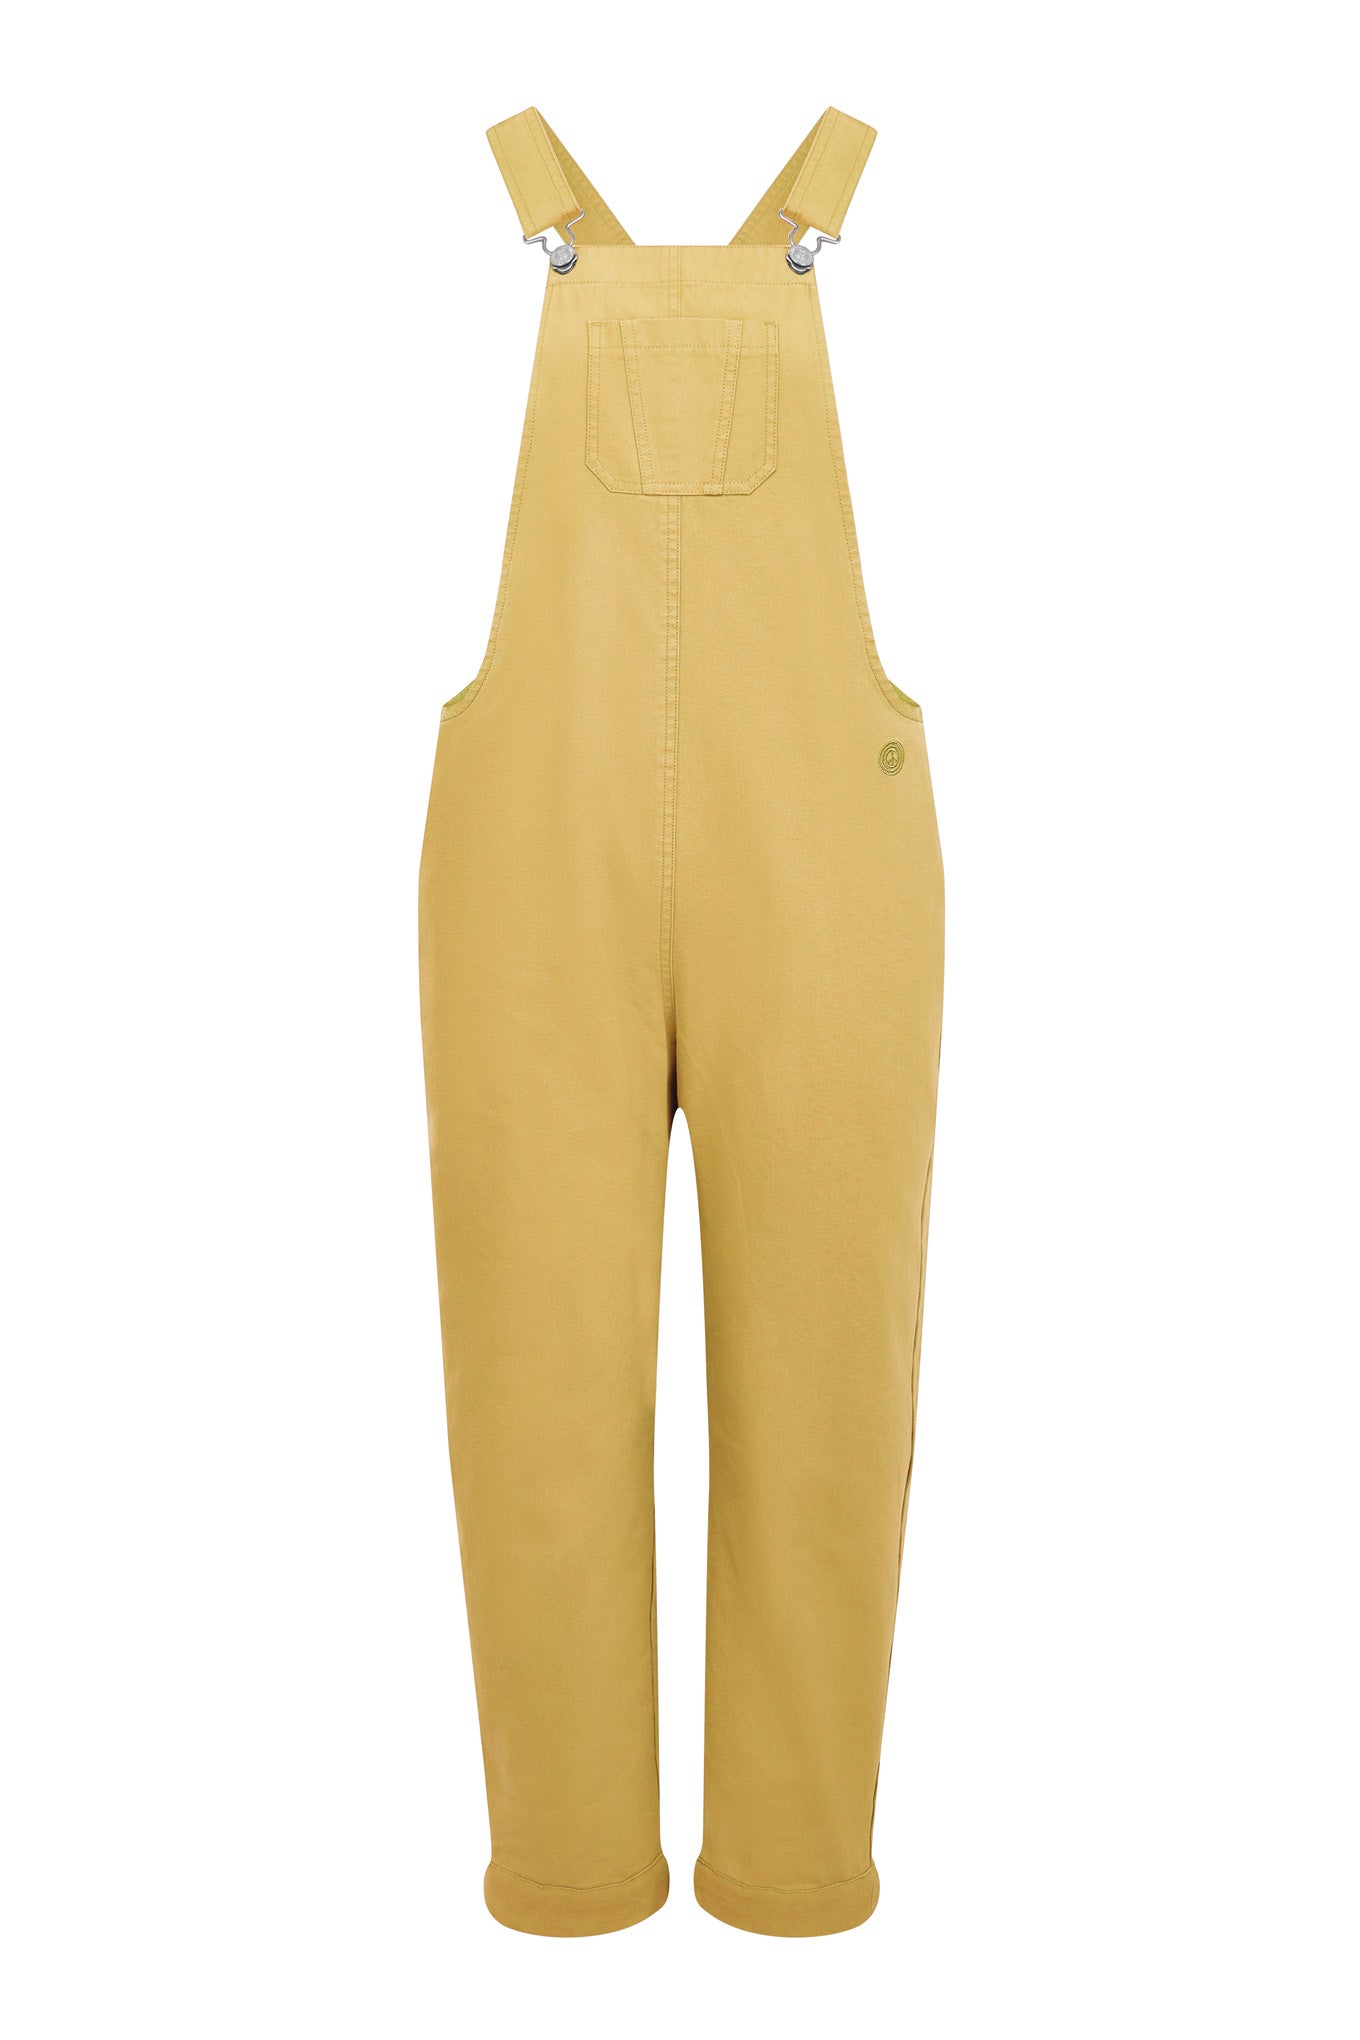 Sand-colored JOY trousers made from 100% organic cotton by Komodo